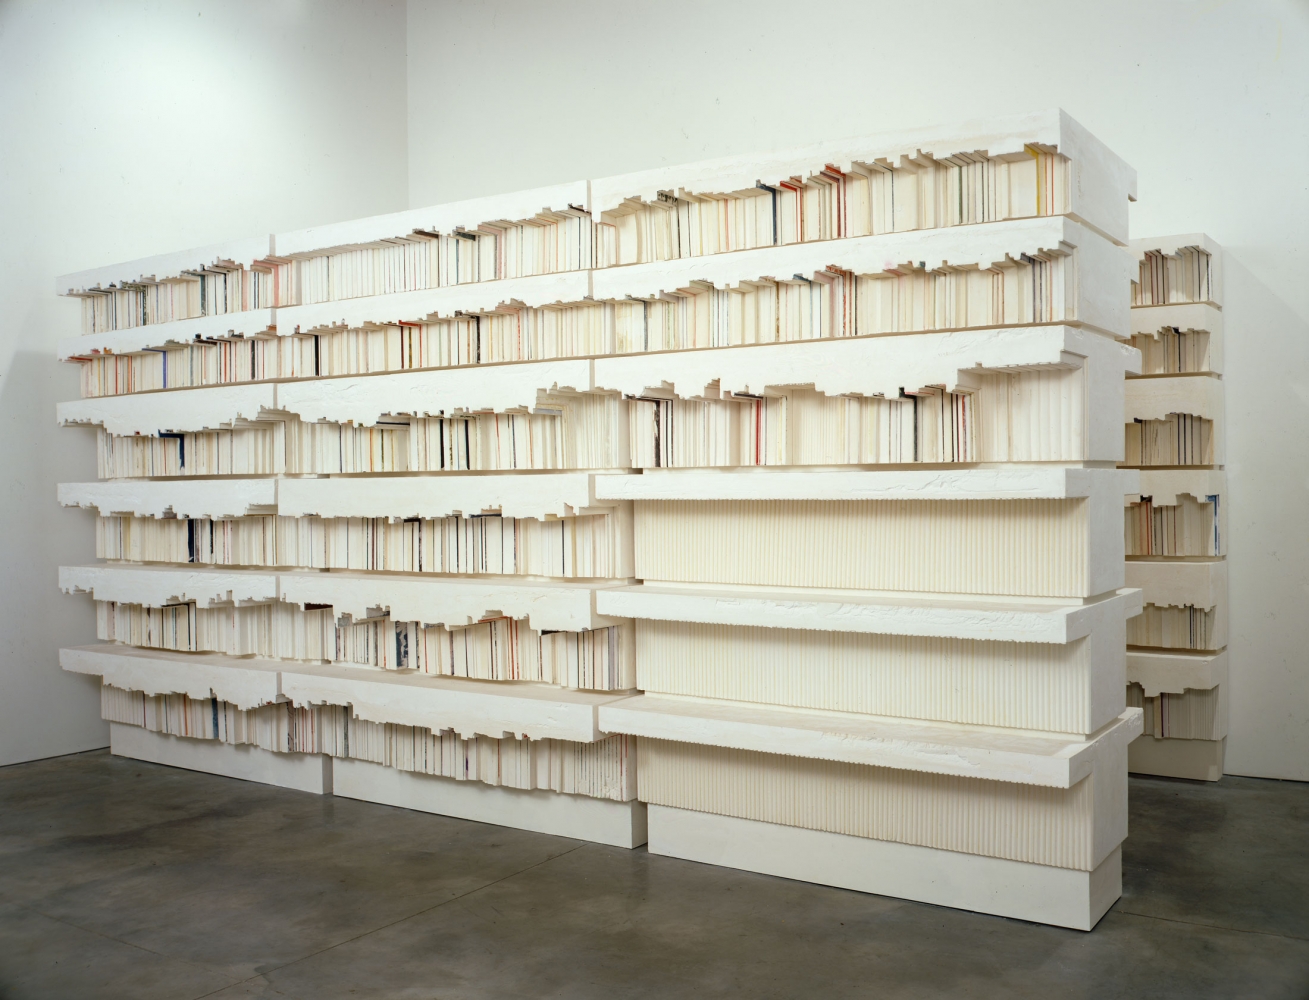 Rachel Whiteread
Untitled (Library), 1999
Dental plaster, polystyrene, fiberboard and steel
105 1/2 x 208 7/8 x 96 1/4 inches
(268.0 x 530.6 x 244.5 cm)